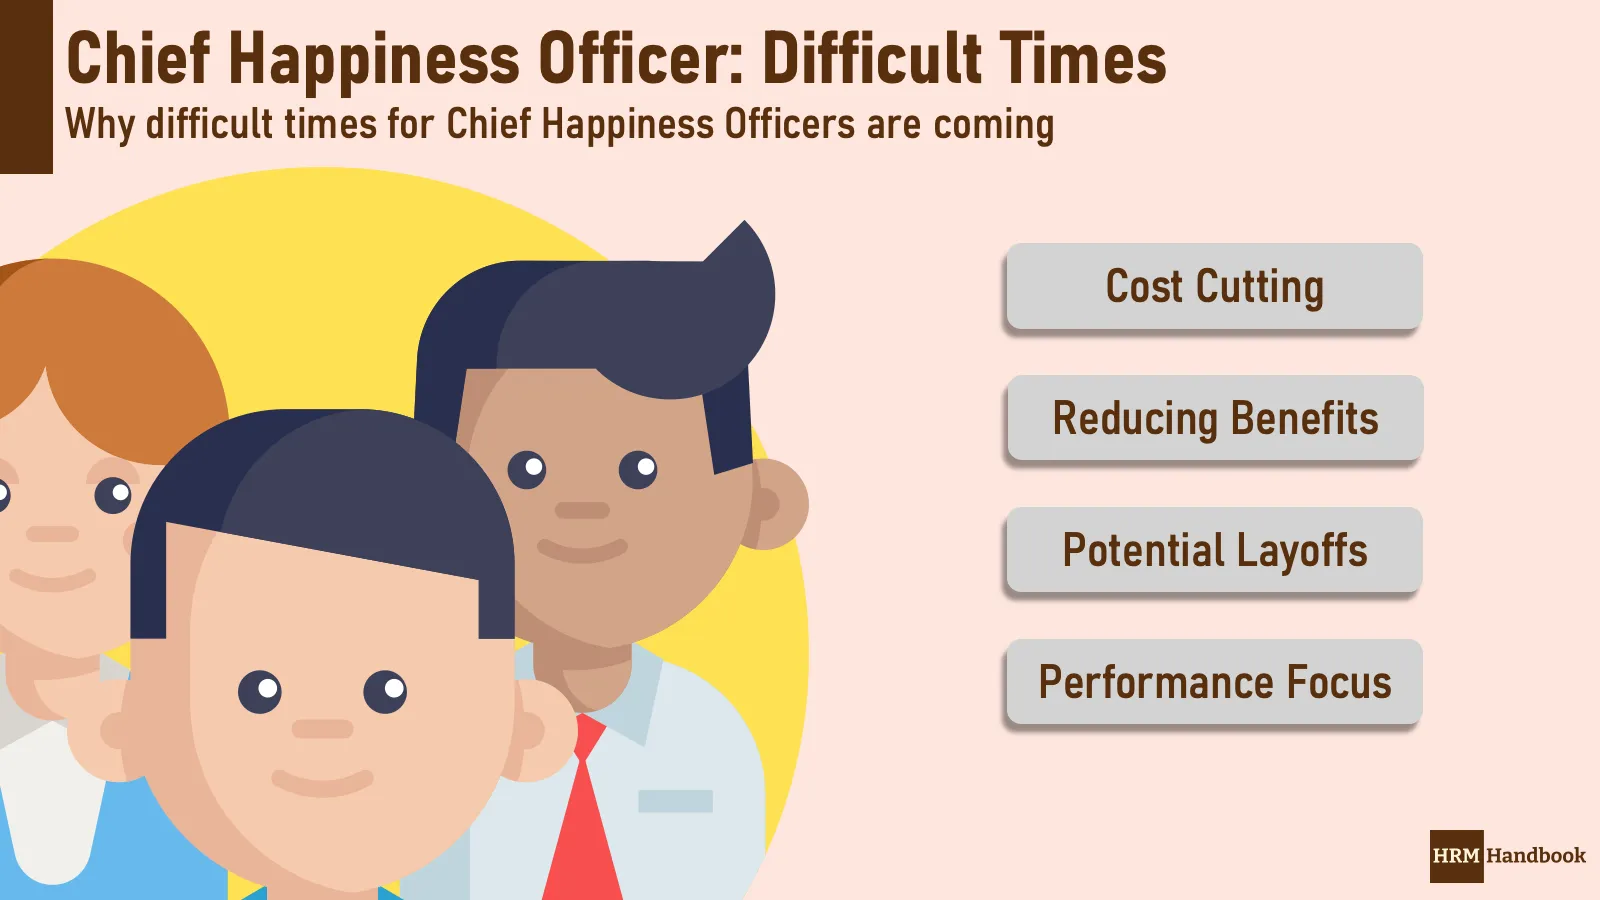 Chief Happiness Officer: Difficult Times